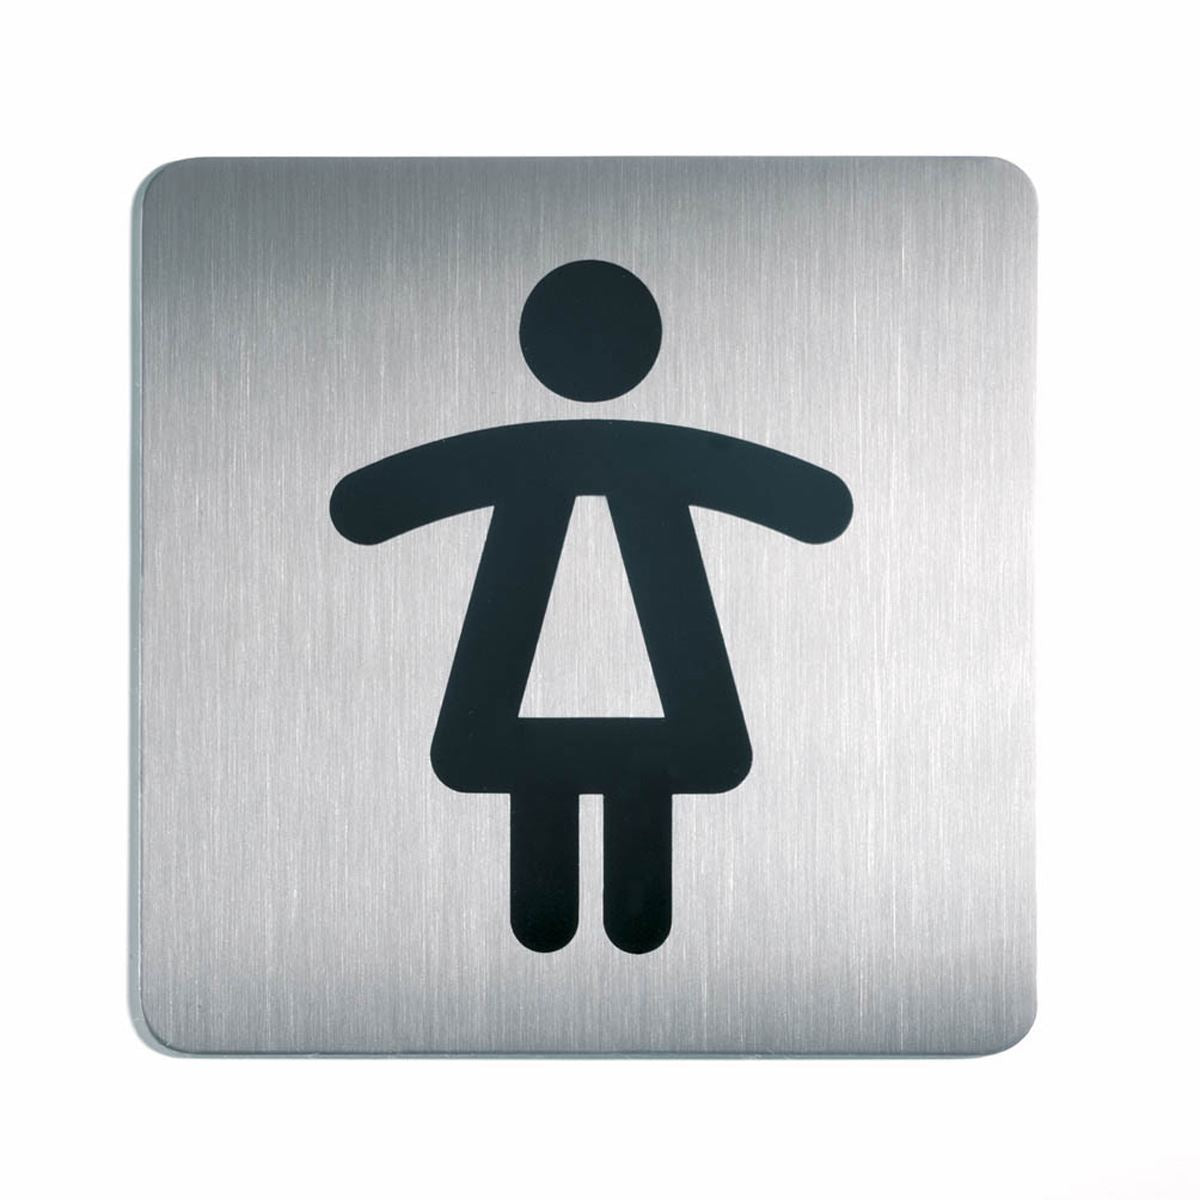 Durable Adhesive Ladies WC Symbol Square Bathroom Toilet Sign | Stainless Steel